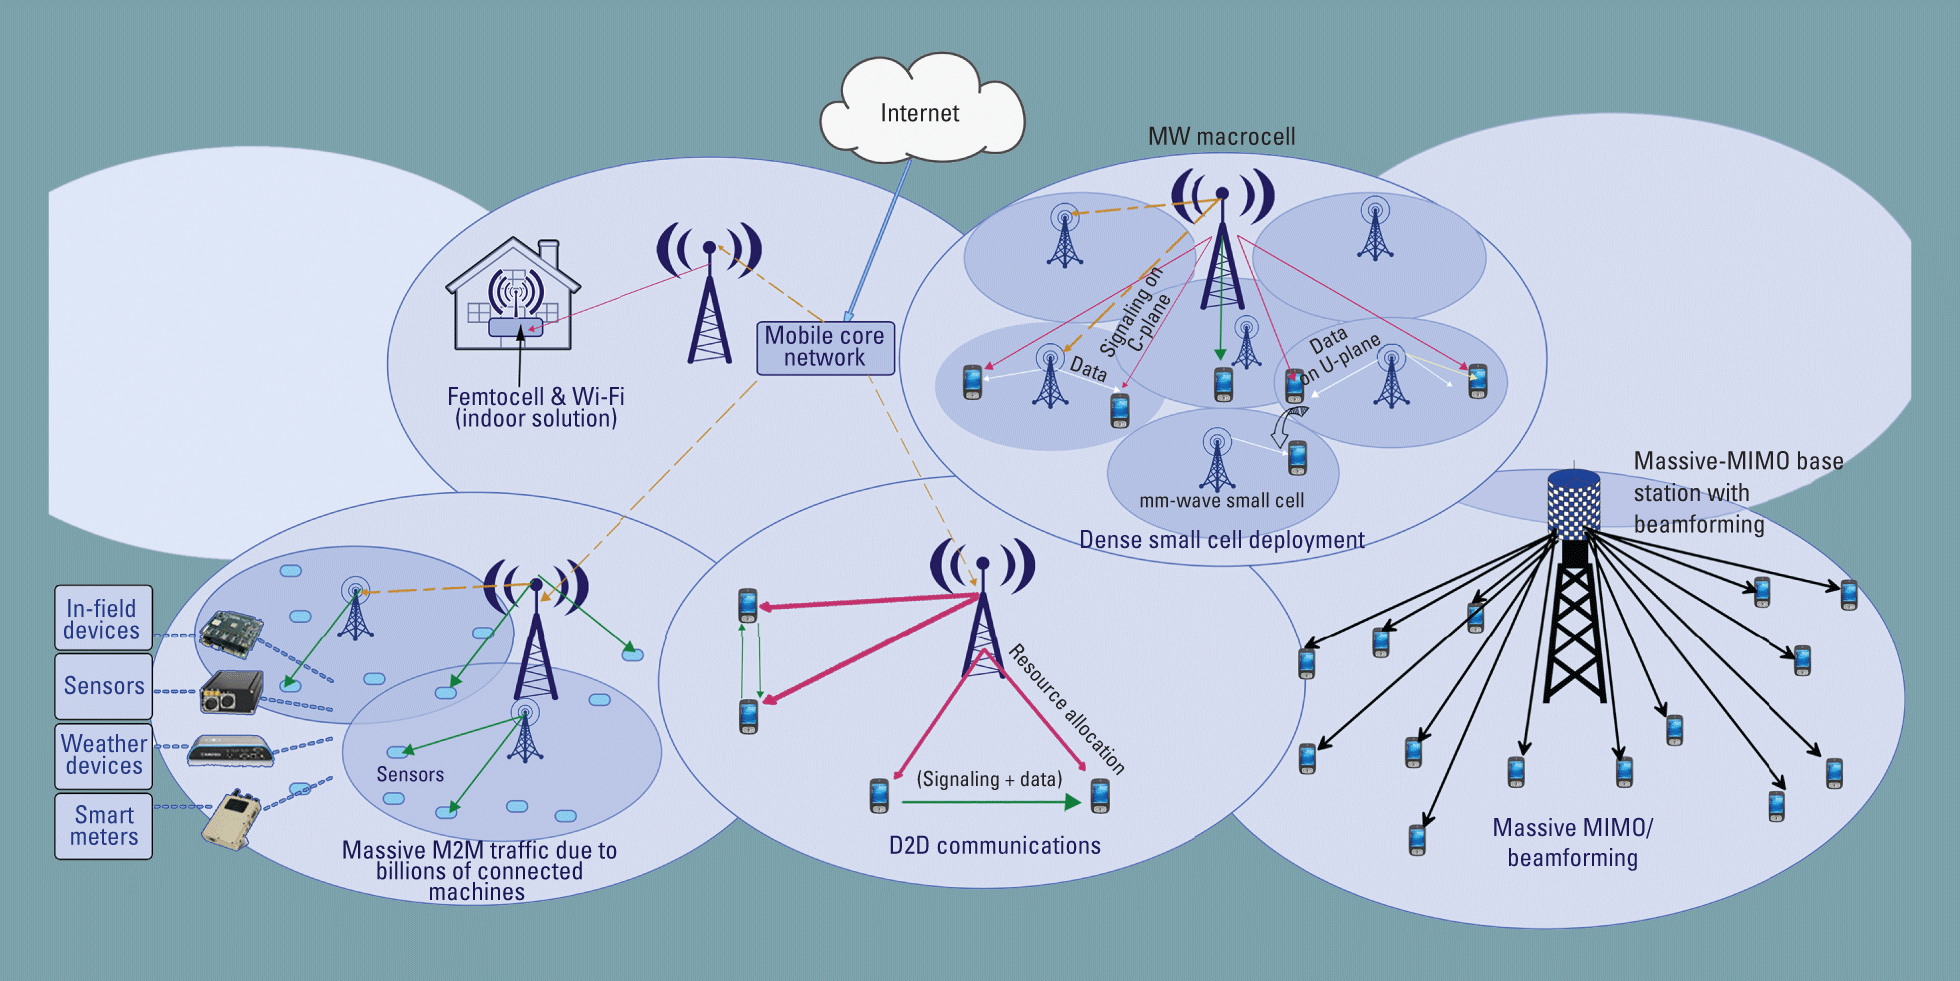 5G Network and Technologies Used